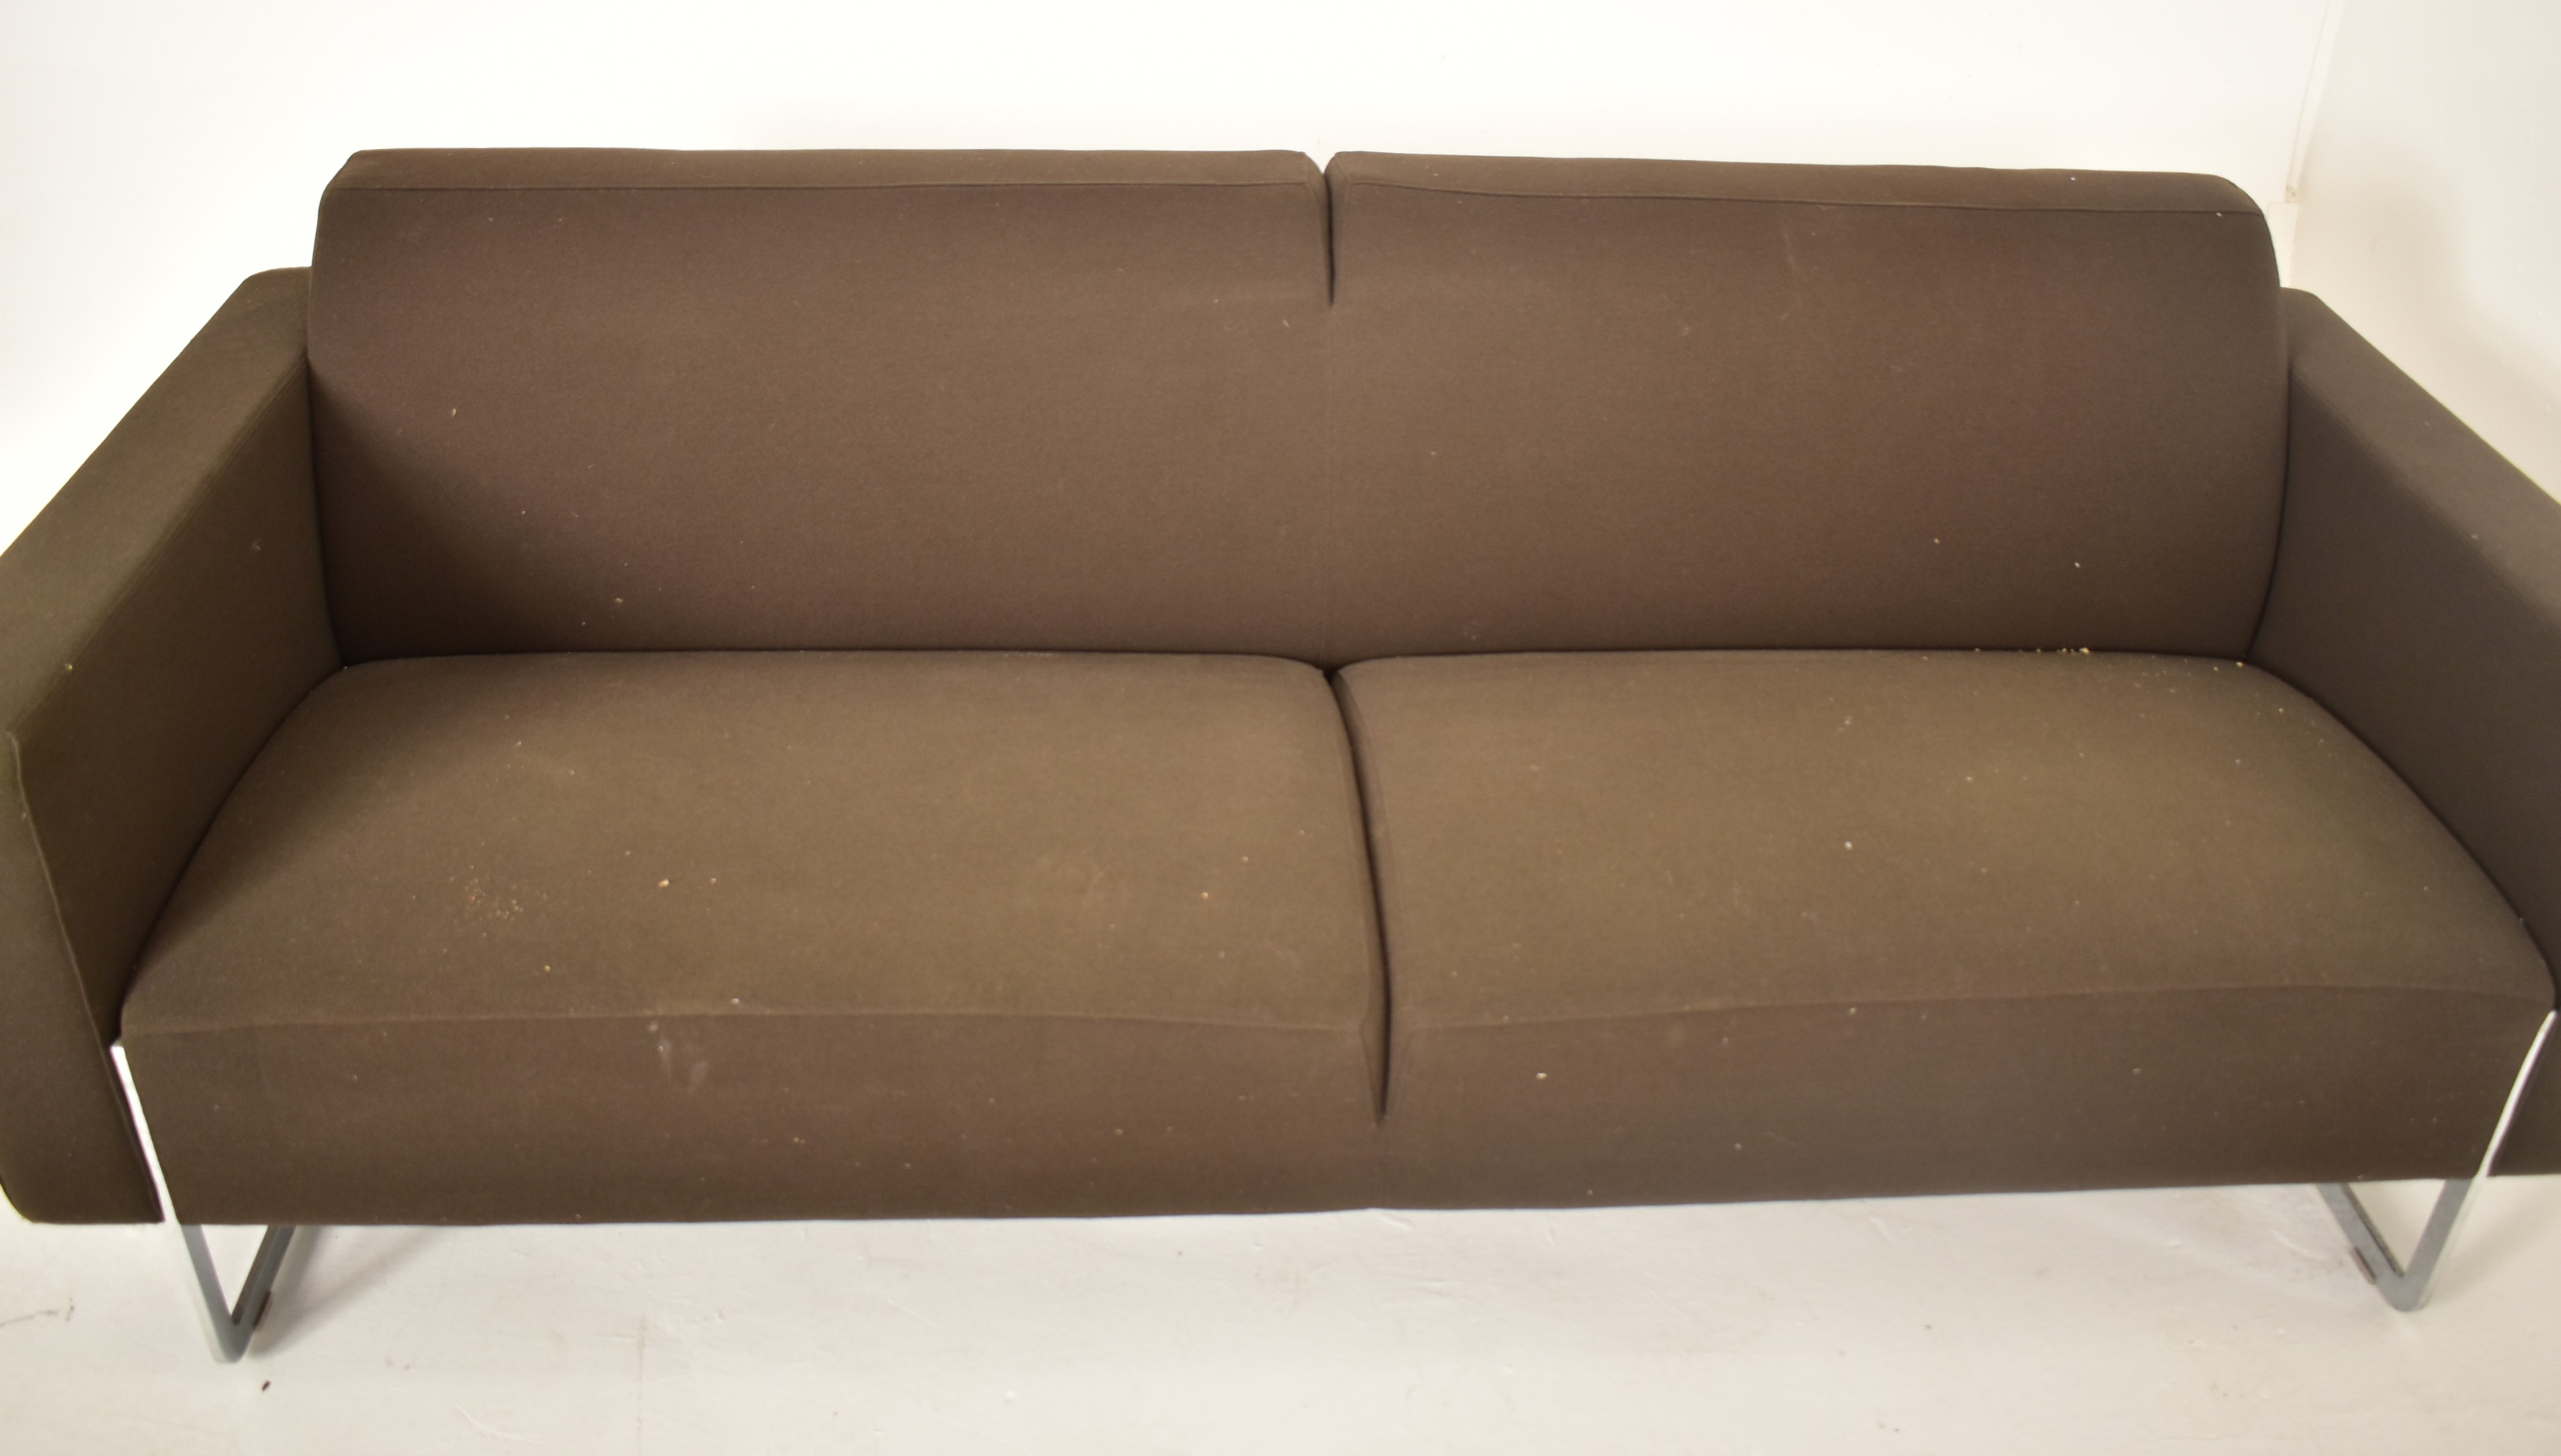 AFTER RENE HOLTEN X ARTIFORT - 2003 FOUR SEATER MARE SOFA - Image 2 of 4